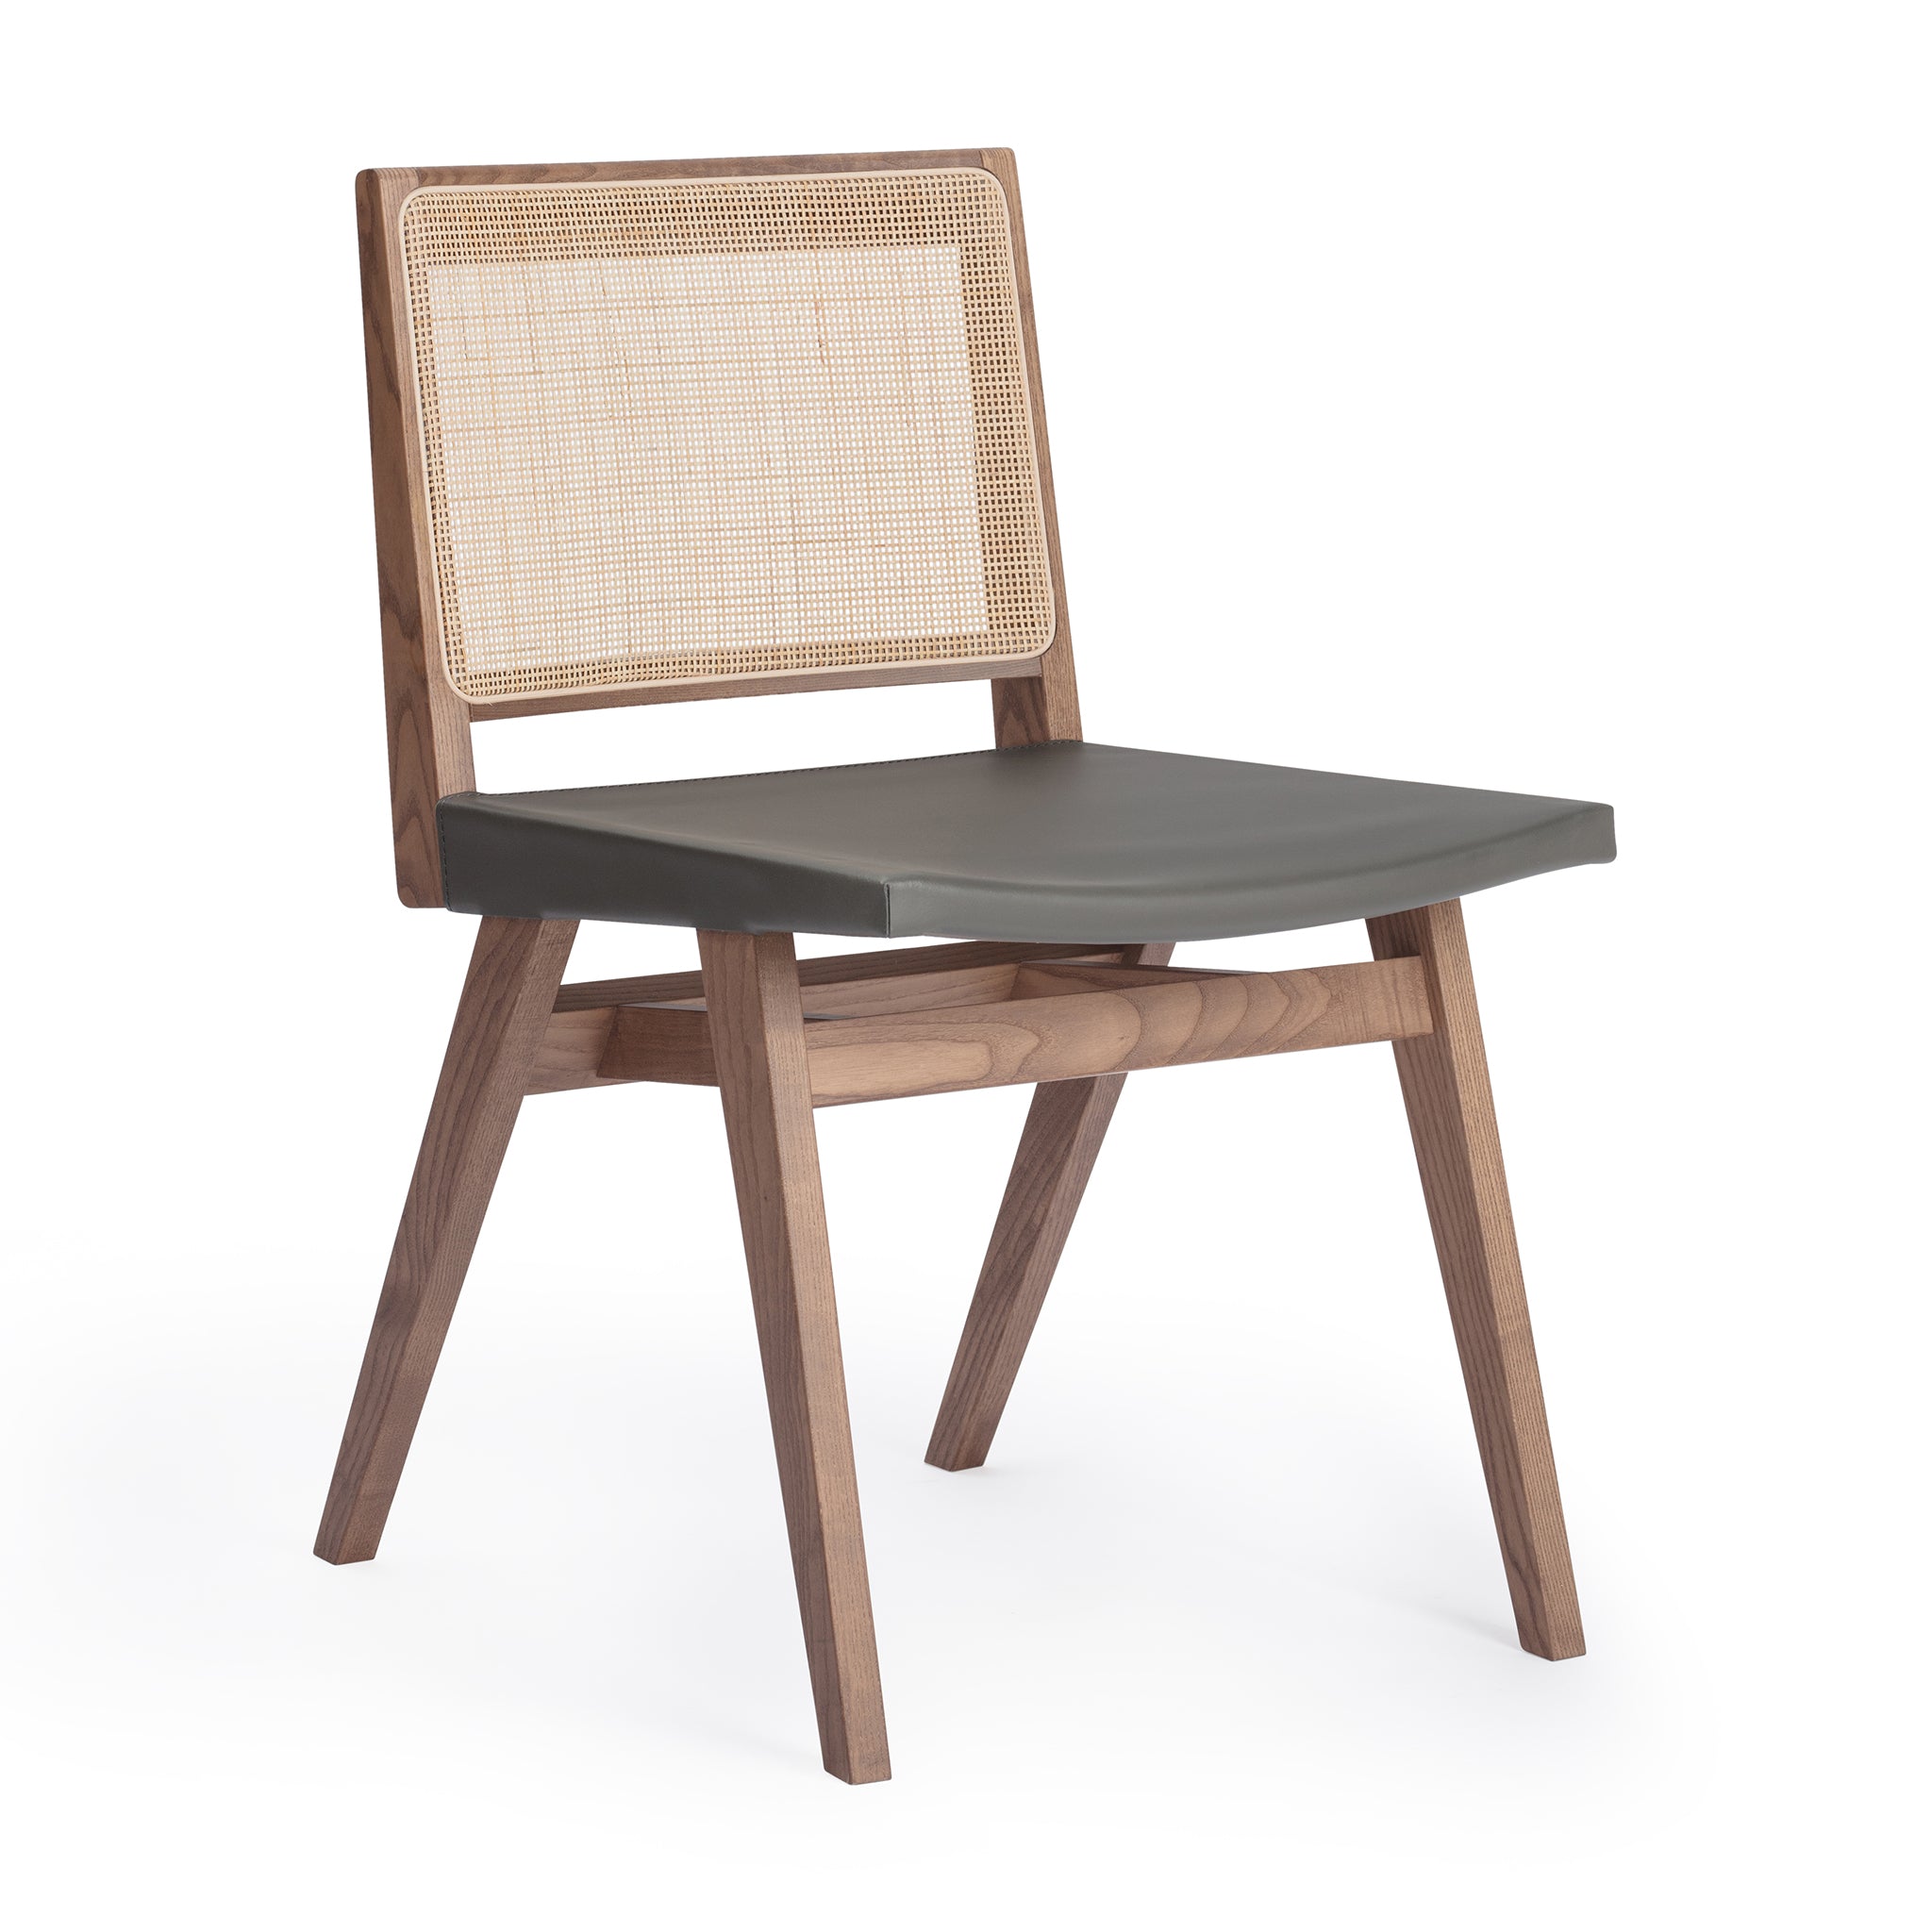 Main view of an Elye modern dining side chair, walnut stained ash frame, square weave cane back, contract grade gray leather seat, produced by Klarel in Italy. #K41-2